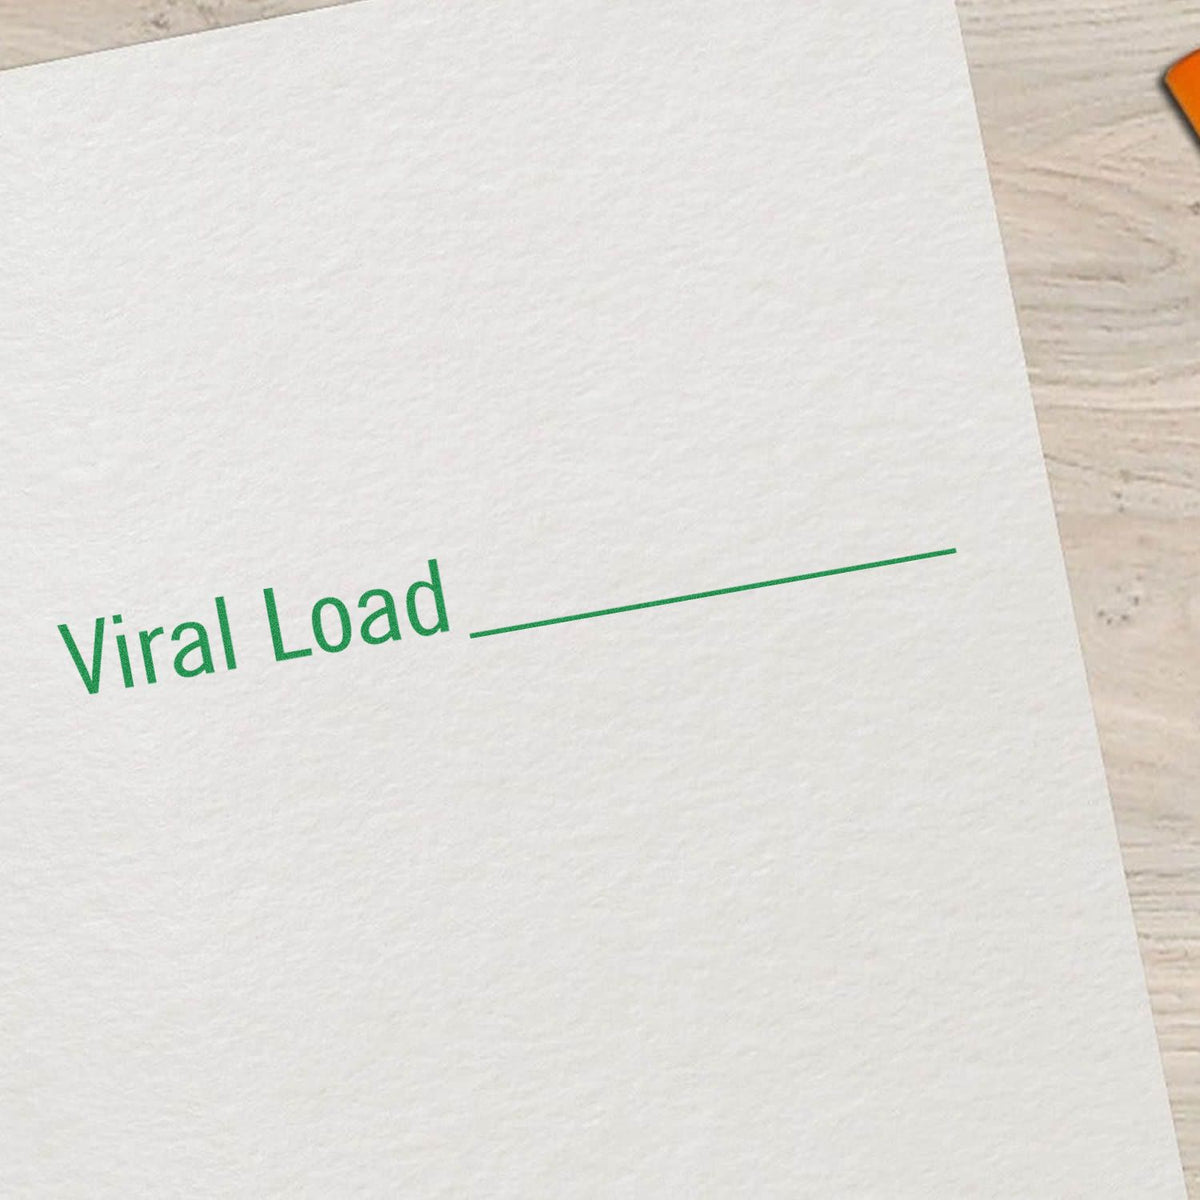 Large Pre-Inked Viral Load Stamp In Use